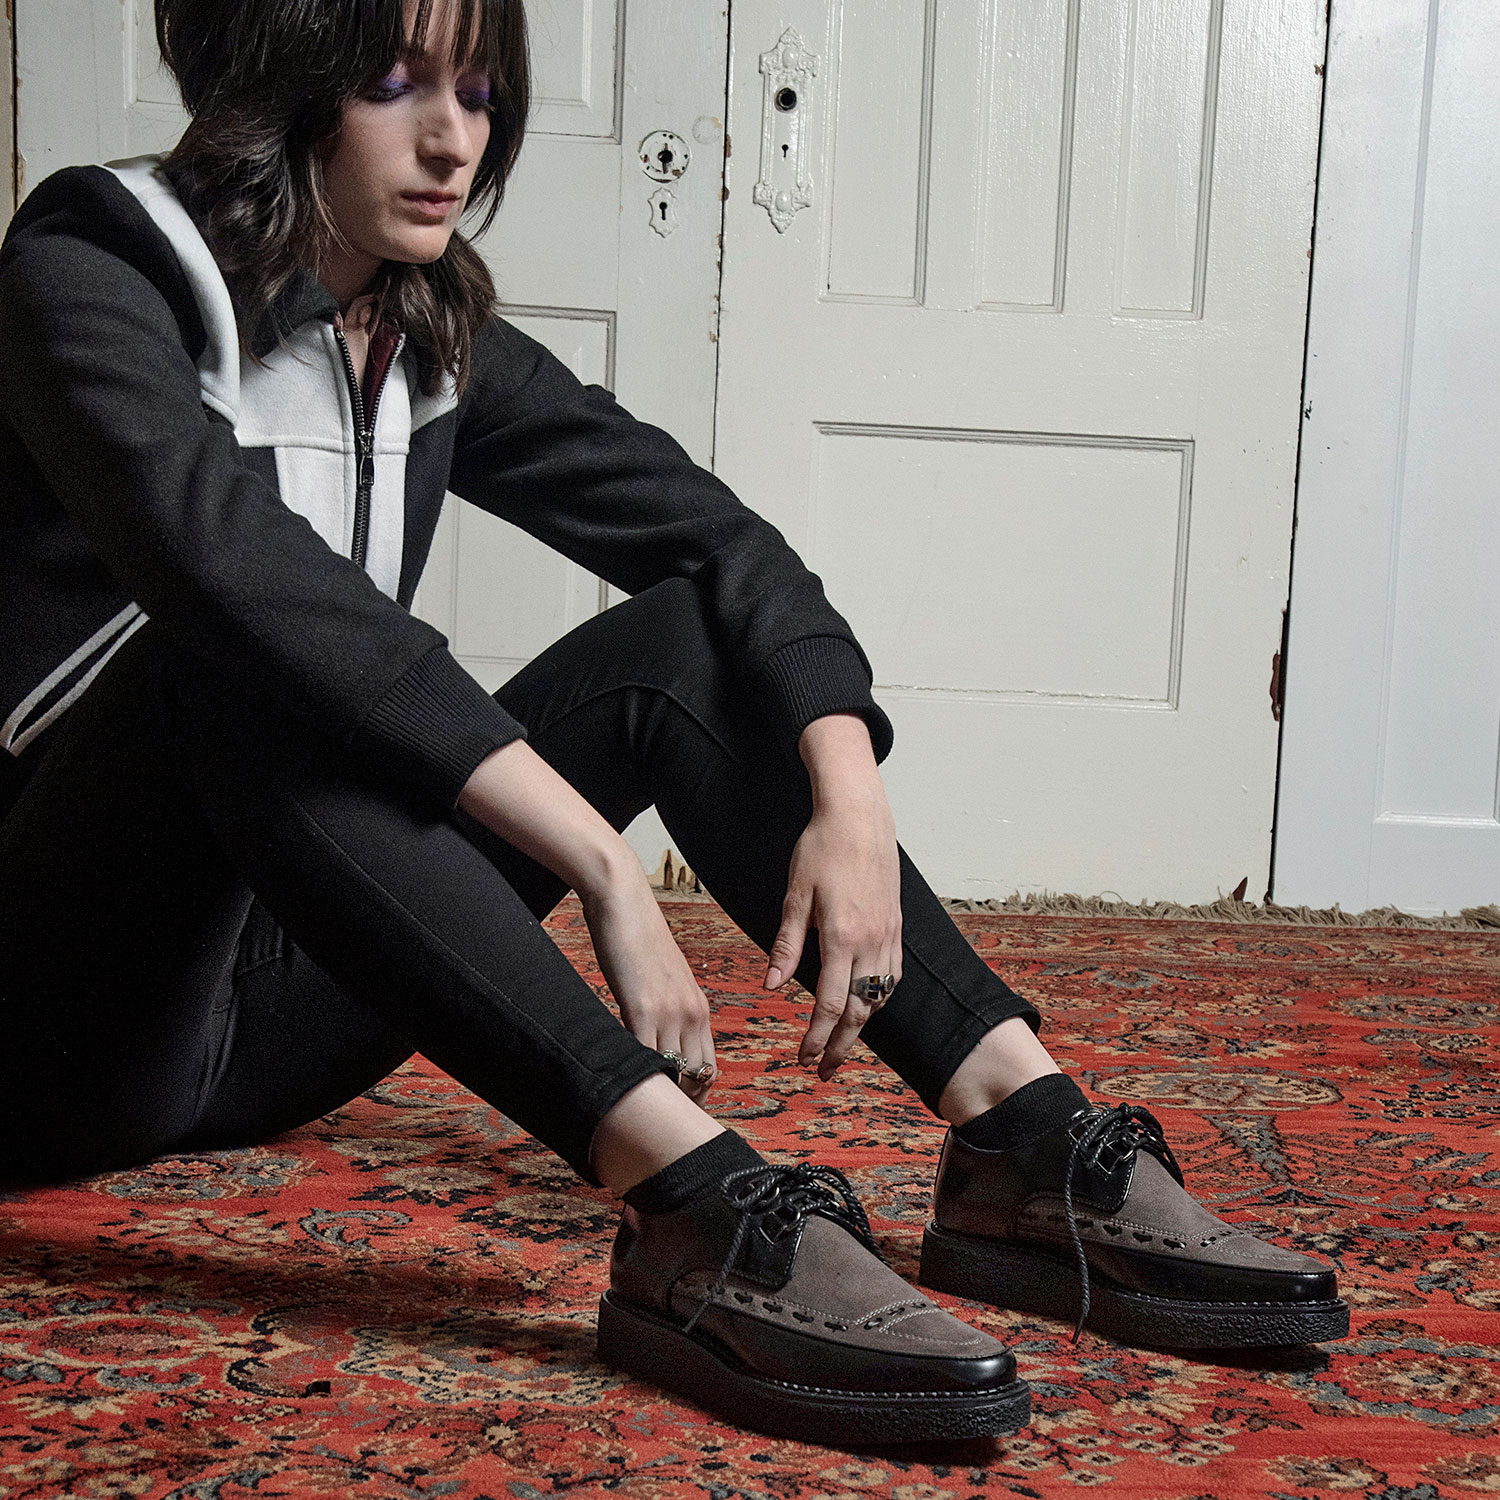 Hawkins - Black and Grey Leather Creepers